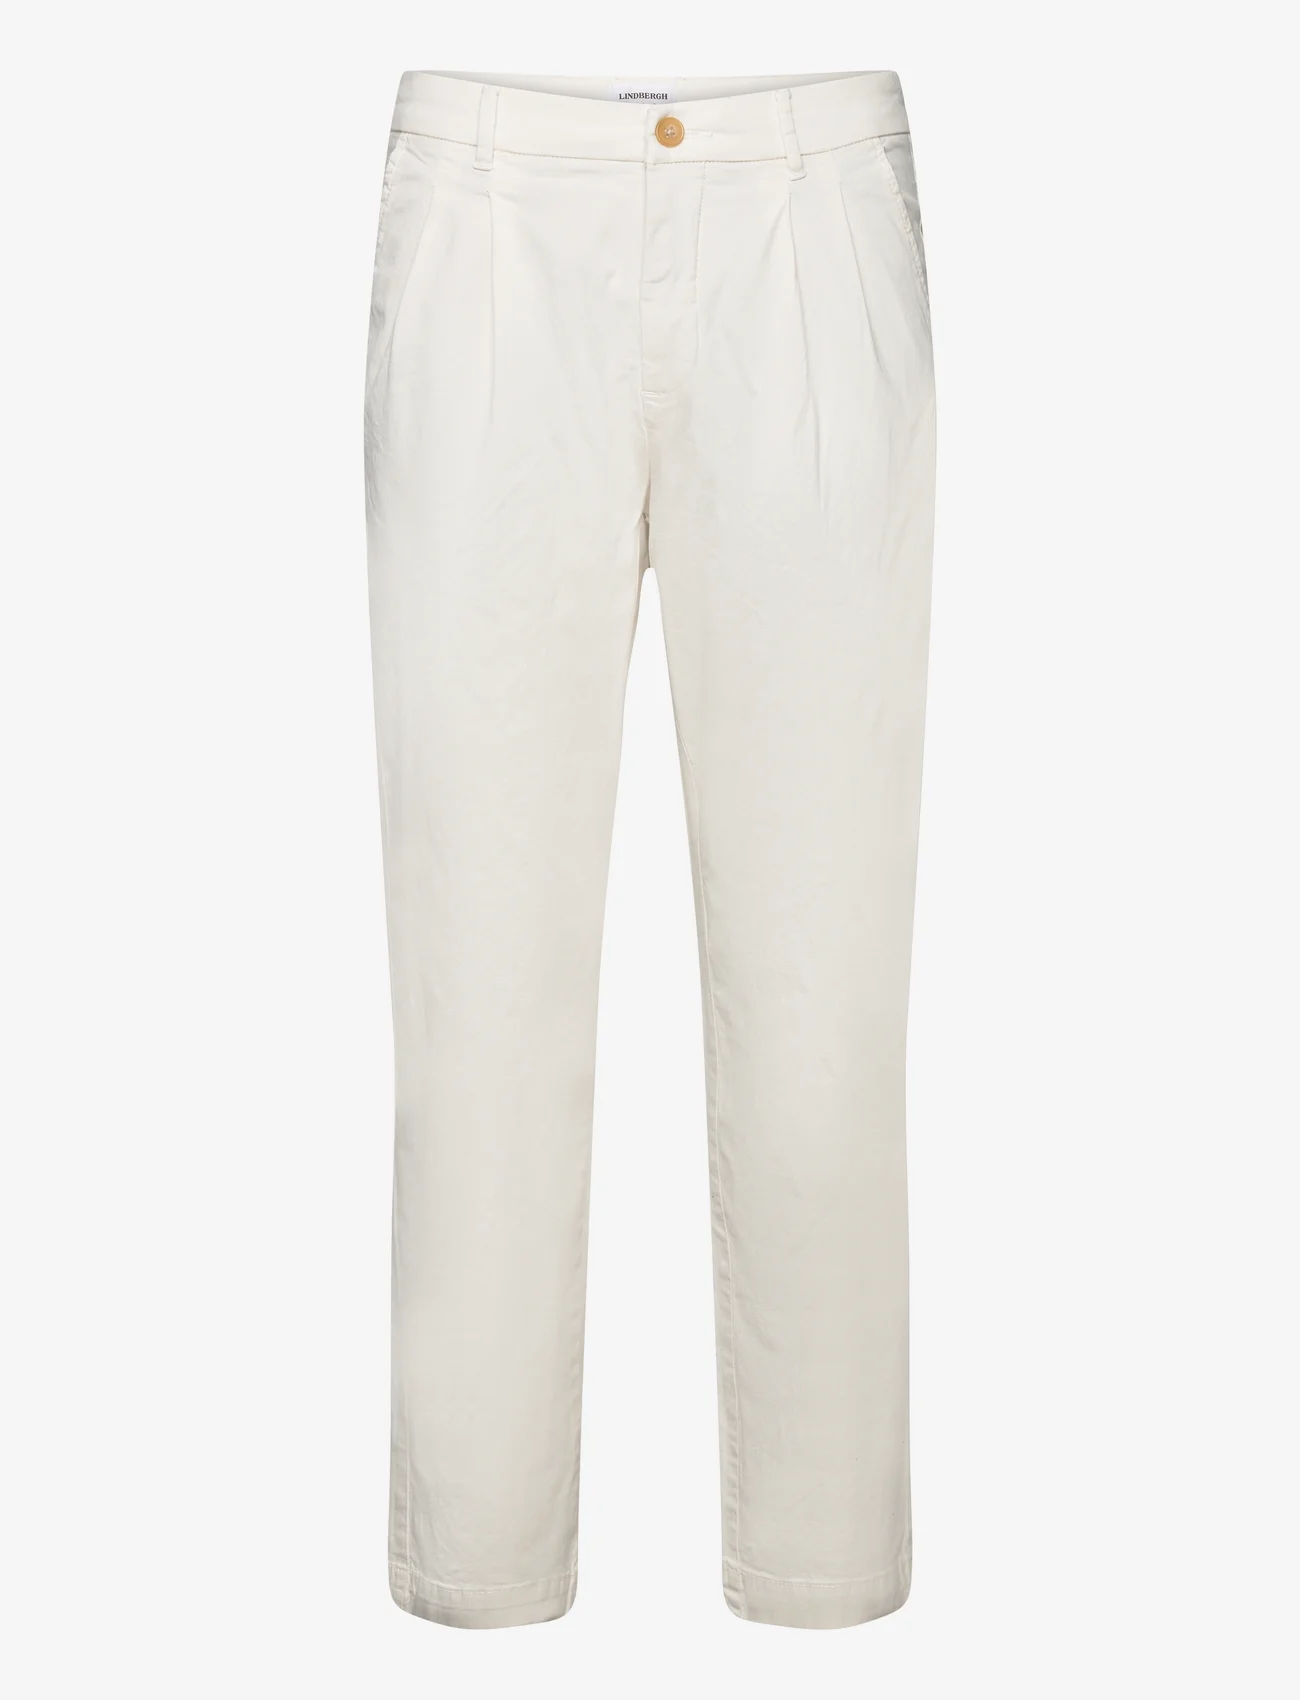 Lindbergh - Wide fit pants - chinos - off white - 0